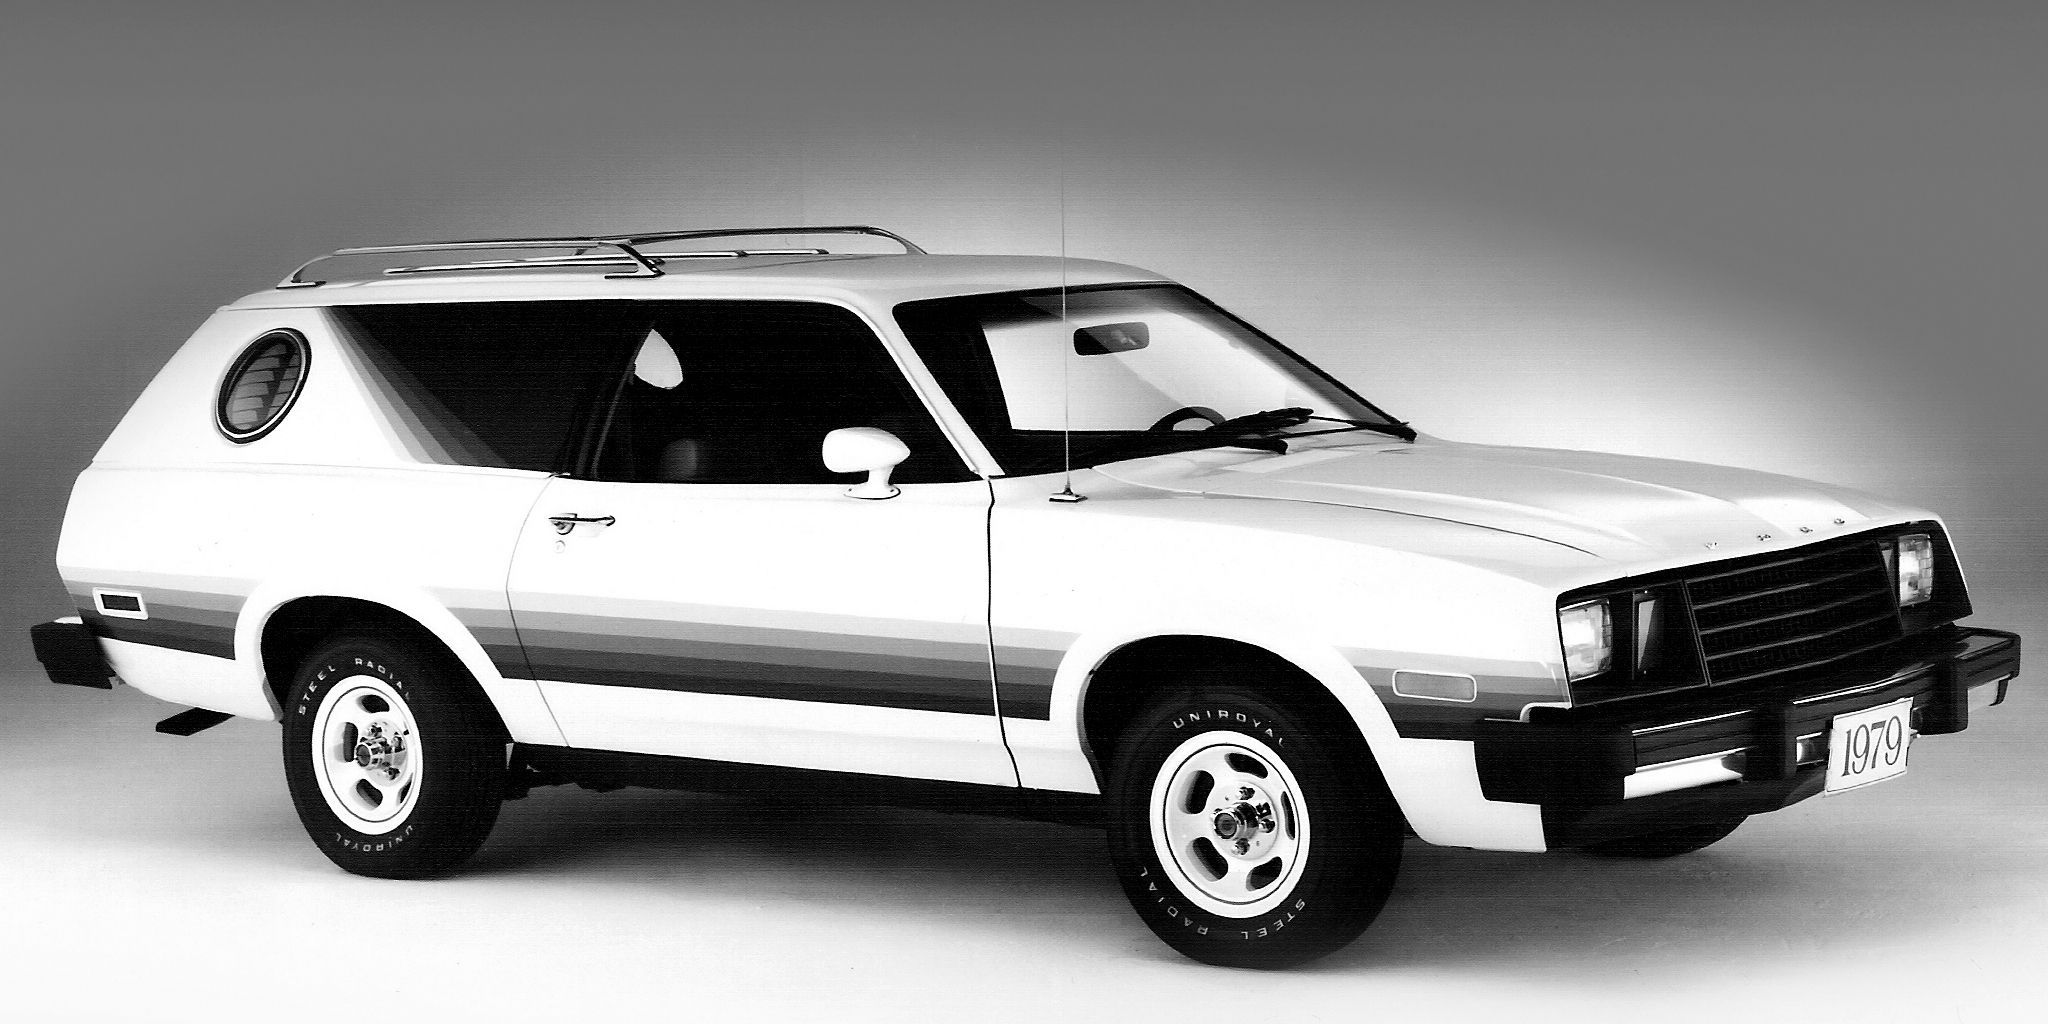 Ugly 1970s Cars We Still Love